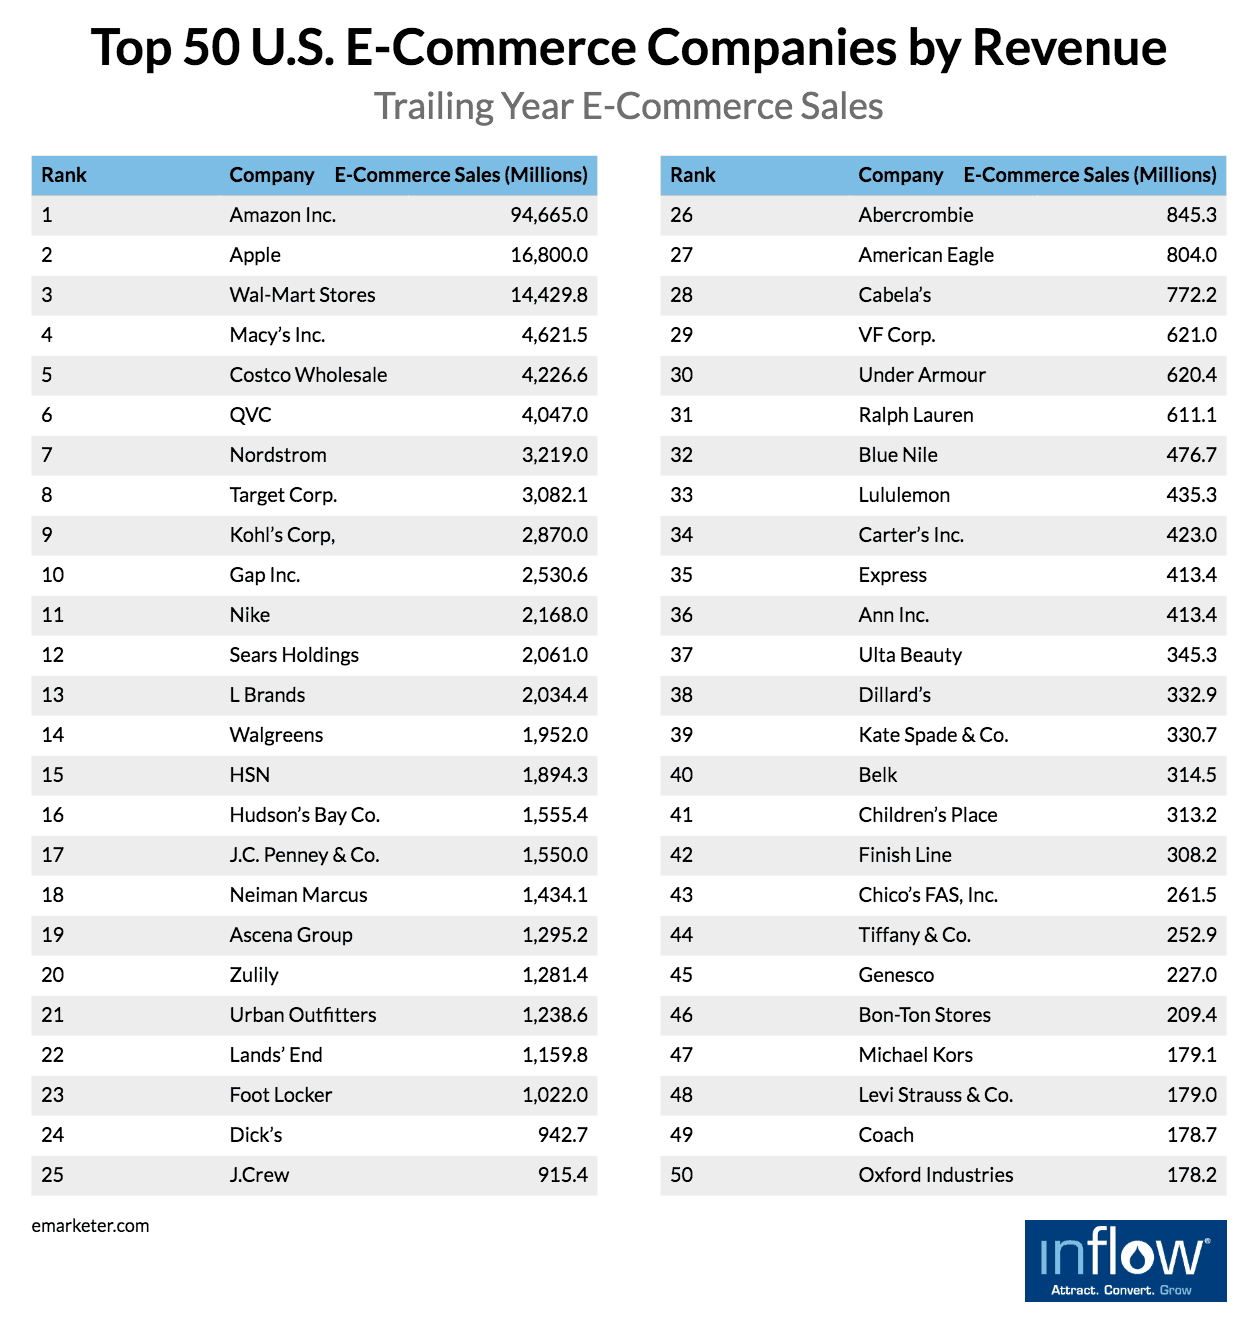 Table titled Top 50 U.S. E-commerce companies by revenue with three columns labeled: Rank, company, E-commerce Sales (millions). 50 rows of data as follows: Rank: 1, Company: Amazon Inc., Total Sales (millions): 94,665.0, Rank: 2, Company: Apple, Total Sales (millions): 16,800.0, Rank: 3, Company: Wal-Mart Stores, Total Sales (millions): 14,429.8., Rank: 4, Company: Macy's Inc., Total Sales (millions): 4,621.5, Rank: 5, Company: Costco Wholesale, Total Sales (millions): 4,226.6, Rank: 6, Company: QVC, Total Sales (millions): 4,047.0, Rank: 7, Company: Nordstrom, Total Sales (millions): 3,219.0, Rank: 8, Company: Target Corp, Total Sales (millions): 3,028.1, Rank: 9, Company: Kohl's Corp, Total Sales (millions): 2,870.0, Rank: 10, Company: Gap Inc., Total Sales (millions): 2,530.6, Rank: 11, Company: Nike, Total Sales (millions): 2,168.0, Rank: 12, Company: Sears Holdings, Total Sales (millions): 2,061.0, Rank: 13, Company: L Brands, Total Sales (millions): 2,034.4, Rank: 14, Company: Walgreens, Total Sales (millions): 1,952.0, Rank: 15, Company: HSN, Total Sales (millions): 1,894.3, Rank: 16, Company: Hudson's Bay Co., Total Sales (millions): 1,555.4, Rank: 17, Company: J.C. Penney & Co., Total Sales (millions): 1,550.0, Rank: 18, Company: Neiman Marcus, Total Sales (millions): 1,434.1, Rank: 19, Company: Ascena Group, Total Sales (millions): 1,295.2, Rank: 20, Company: Zulily, Total Sales (millions): 1,281.4, Rank: 21, Company: Urban Outfitters, Total Sales (millions): 1,238.6, Rank: 22, Company: Lands' End, Total Sales (millions): 1,159.8, Rank: 23, Company: Foot Locker, Total Sales (millions): 1,022.0, Rank: 24, Company: Dick's, Total Sales (millions): 942.7, Rank: 25, Company: J. Crew, Total Sales (millions): 915.4, Rank: 26, Company: Abercrombie, Total Sales (millions): 845.3, Rank: 27, Company: American Eagle, Total Sales (millions): 804.0, Rank: 28, Company: Cabela's, Total Sales (millions): 772.2, Rank: 29, Company: V F Corp, Total Sales (millions): 621.0, Rank: 30, Company: Under Armour, Total Sales (millions): 620.4, Rank: 31, Company: Ralph Lauren, Total Sales (millions): 611.1, Rank: 32, Company: Blue Nile, Total Sales (millions): 476.7, Rank: 33, Company: Lululemon, Total Sales (millions):  435.3, Rank: 34, Company: Carter's Inc., Total Sales (millions): 423.0, Rank: 35, Company: Express, Total Sales (millions): 413.4,  Rank: 36, Company: Ann Inc., Total Sales (millions): 413.4, Rank: 37, Company: Ulta Beauty, Total Sales (millions): 345.3, Rank: 38, Company: Dillard's, Total Sales (millions): 332.9, Rank: 39, Company: Kate Spade & Co., Total Sales (millions): 330.7, Rank: 40, Company: Belk, Total Sales (millions): 314.5, Rank: 41, Company: Children's Place, Total Sales (millions): 313.2, Rank: 42, Company: Finish Line, Total Sales (millions): 308.2, Rank: 43, Company: Chico's  FAS, Inc., Total Sales (millions): 261.5, Rank: 44, Company: Tiffany & Co., Total Sales (millions): 252.9, Rank: 45, Company: Genesco, Total Sales (millions): 227.0, Rank: 46, Company: Bon-Ton Stores, Total Sales (millions): 209.4, Rank: 47, Company: Michael Kors, Total Sales (millions): 179.1, Rank: 48, Company: Levi Strauss & Co., Total Sales (millions): 179.0,  Rank: 49, Company: Coach, Total Sales (millions): 178.7, Rank: 50, Company: Oxford Industries, Total Sales (millions): 178.2. emarketer.com. Logo: Inflow. Attract. Convert. Grow. 